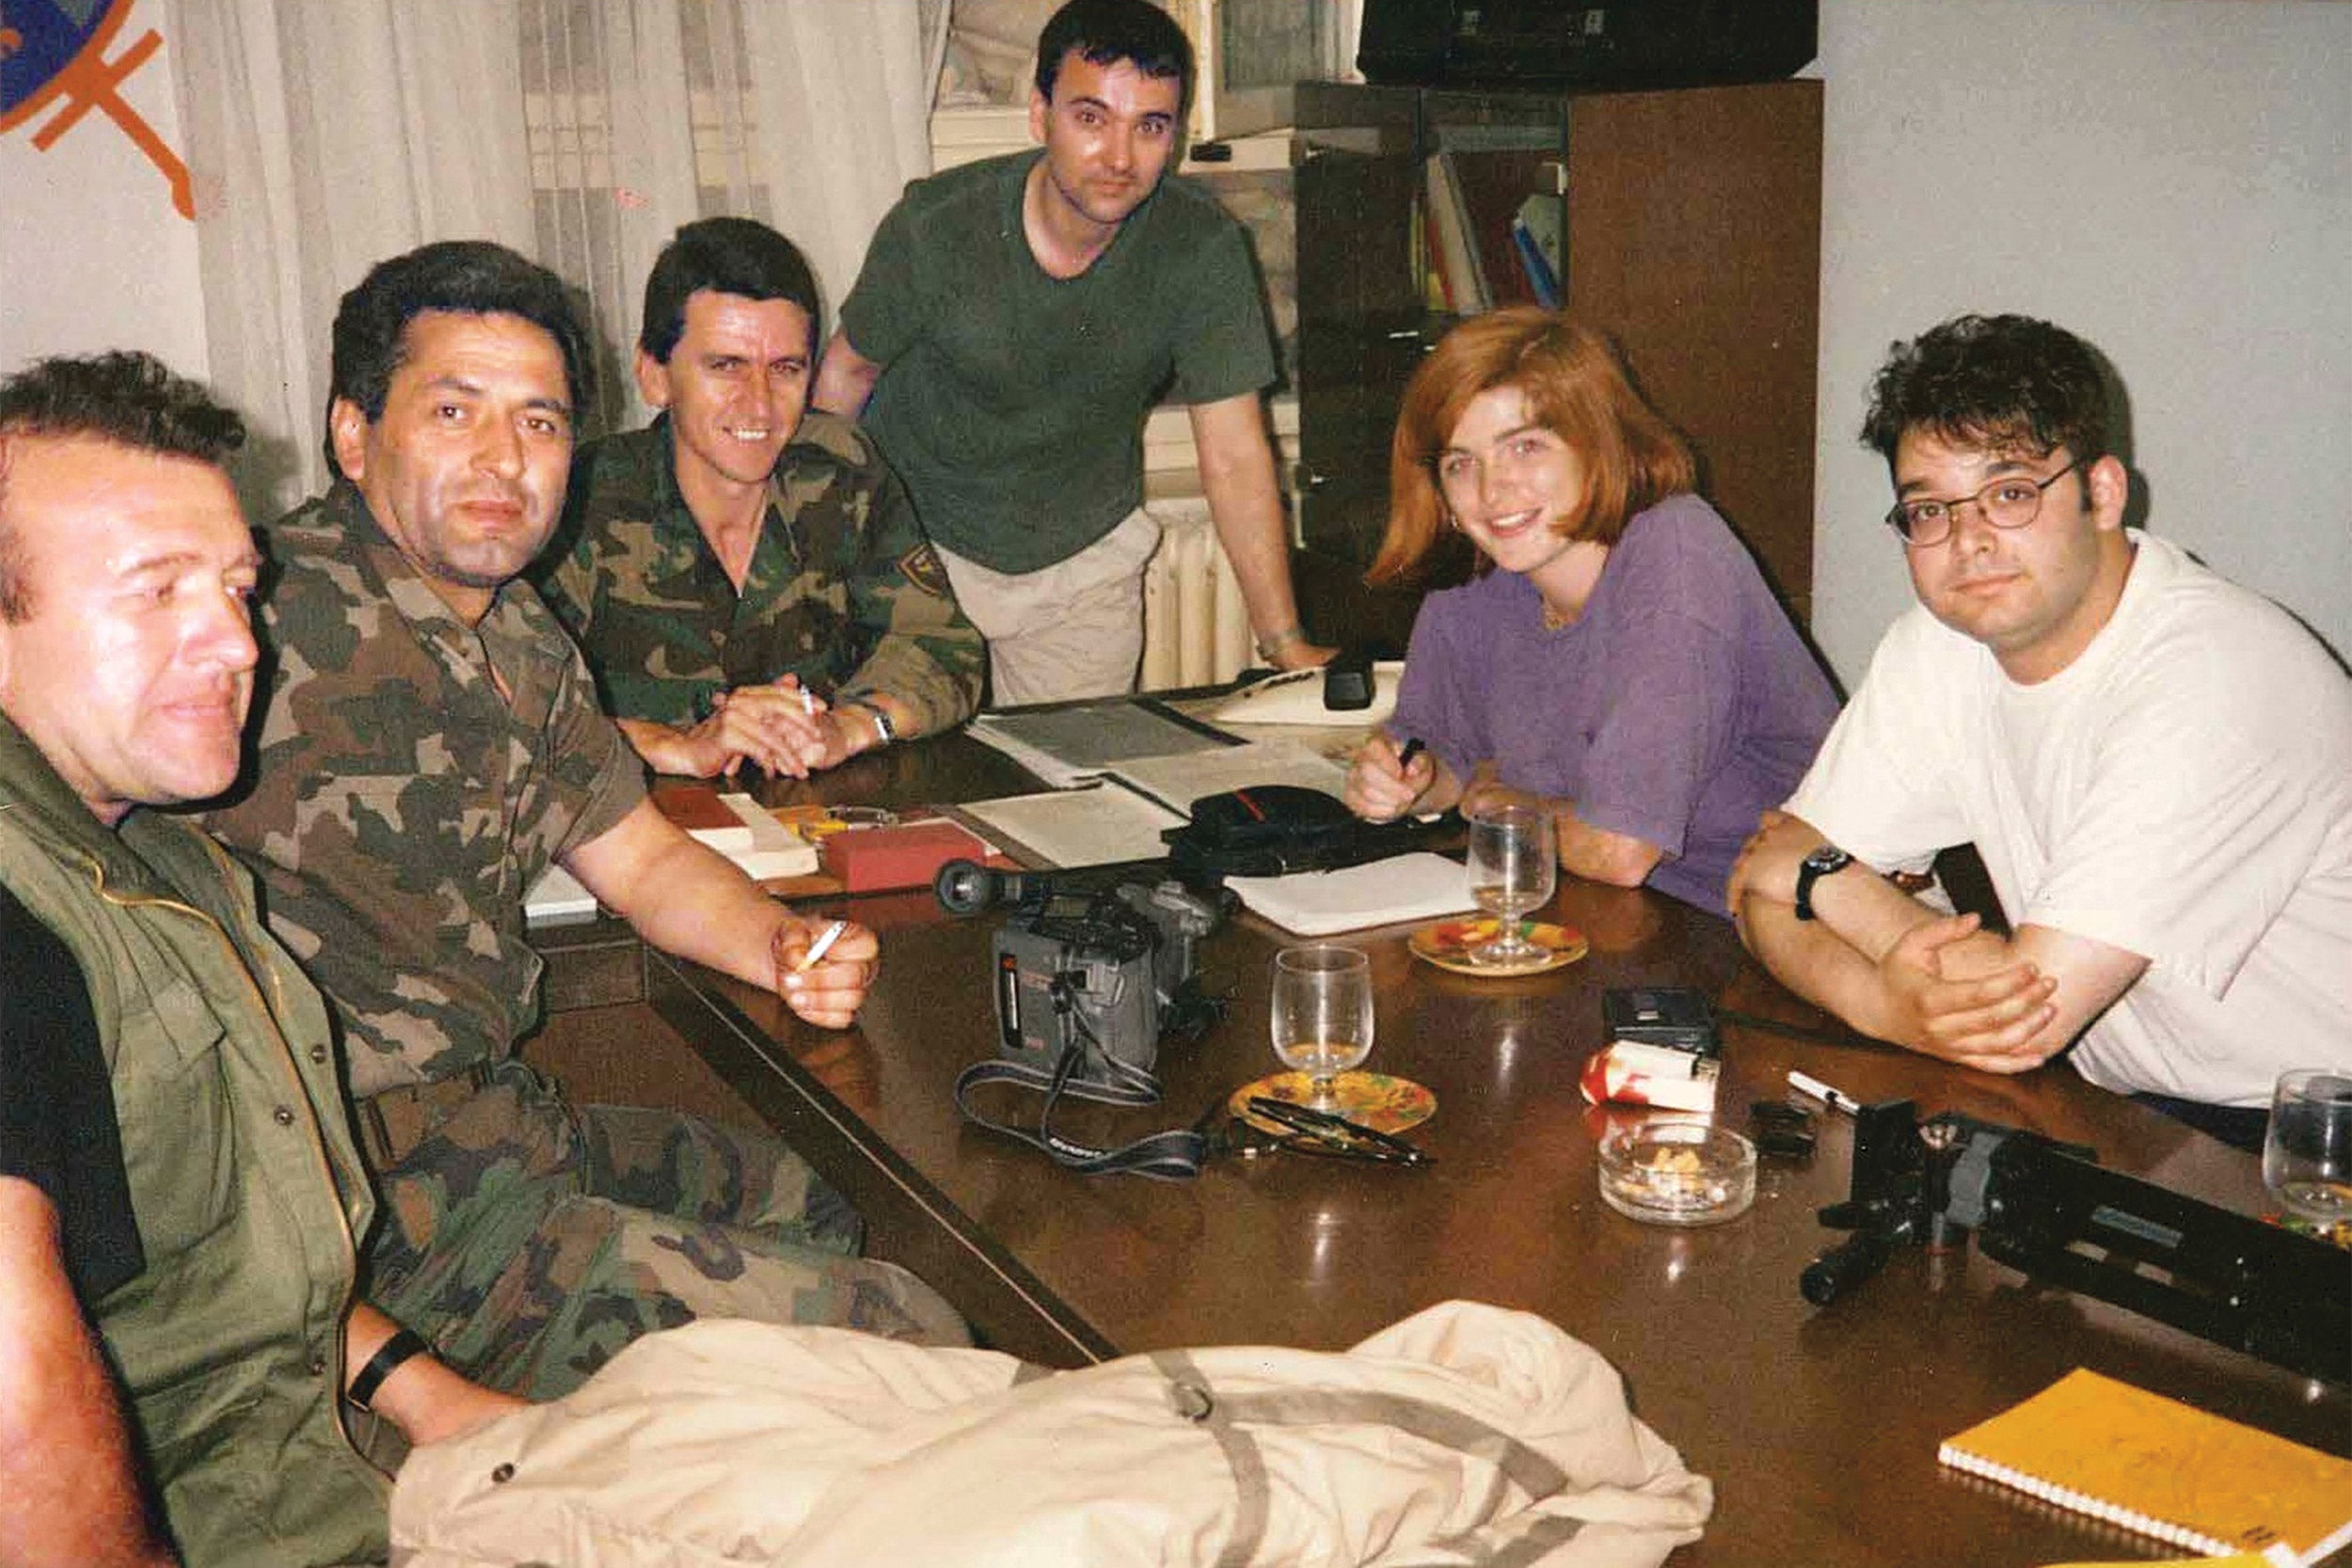 Samantha Power with a journalist and a friend interviewing a group of Bosnian military officers.